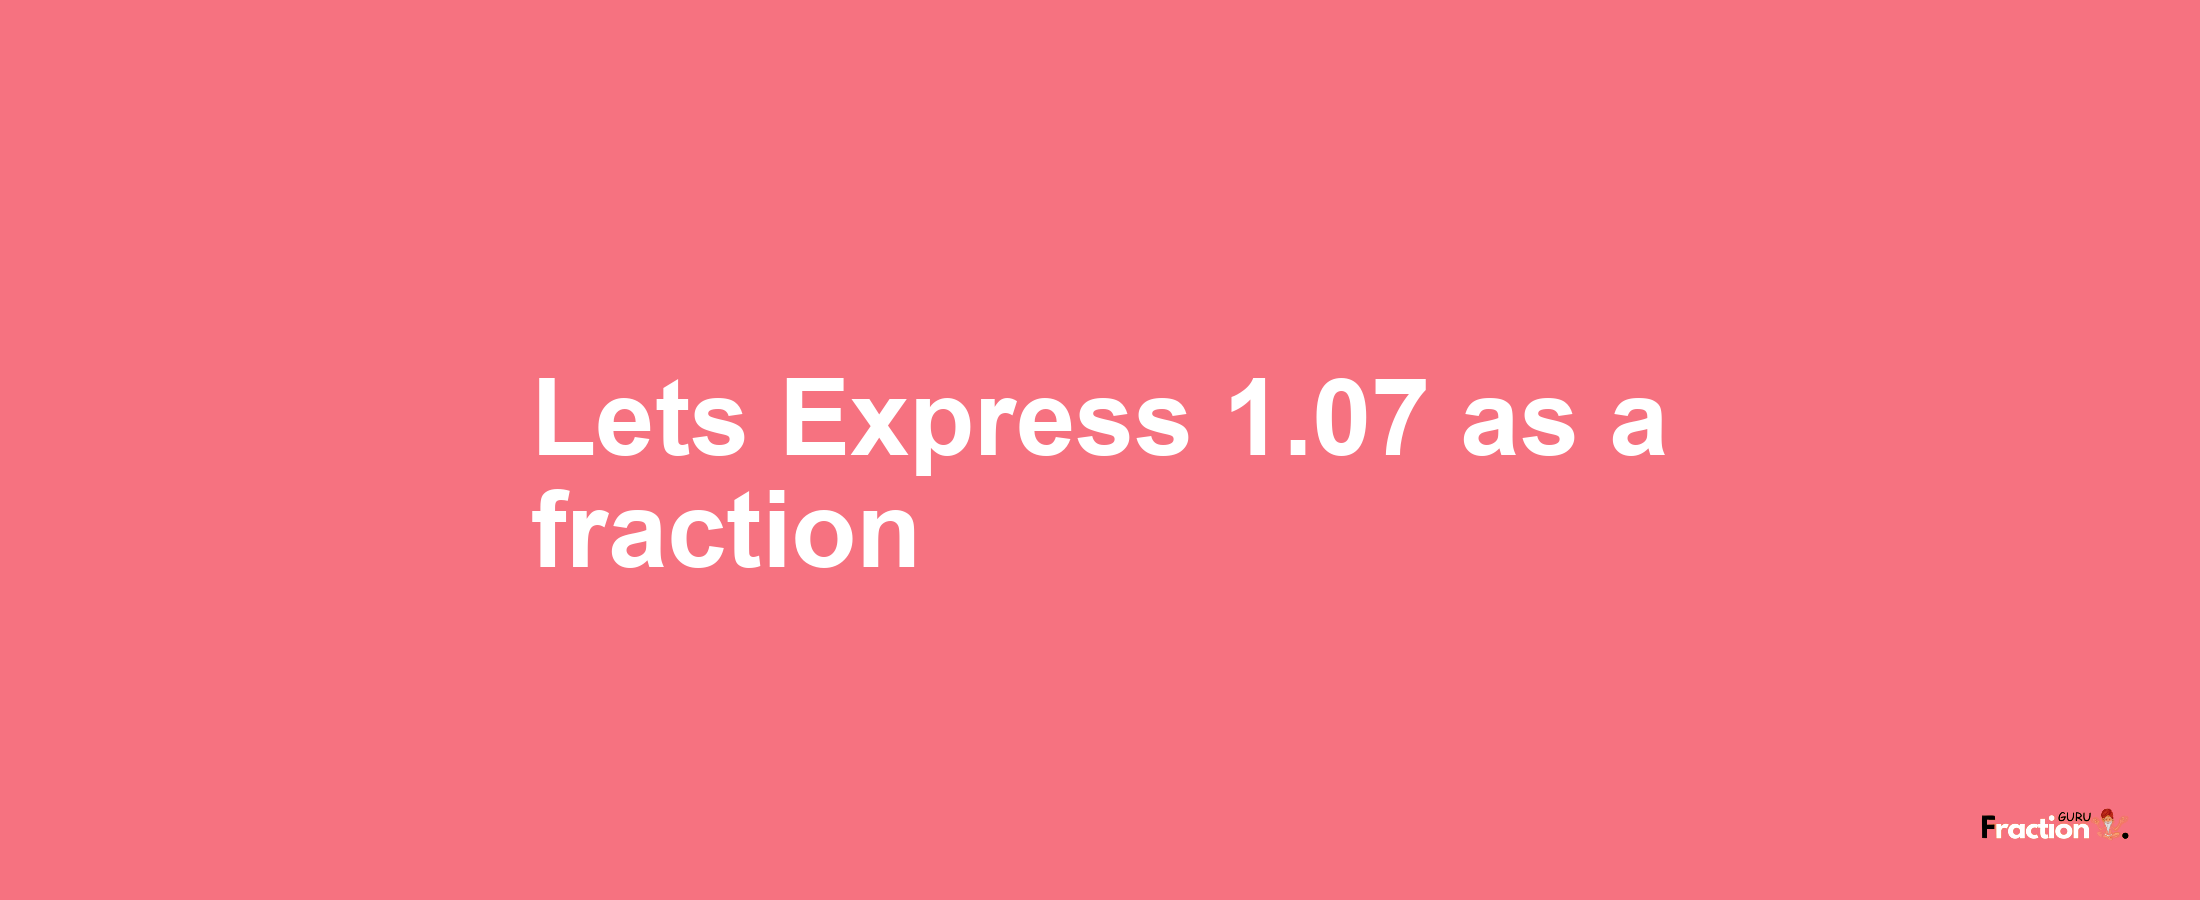 Lets Express 1.07 as afraction